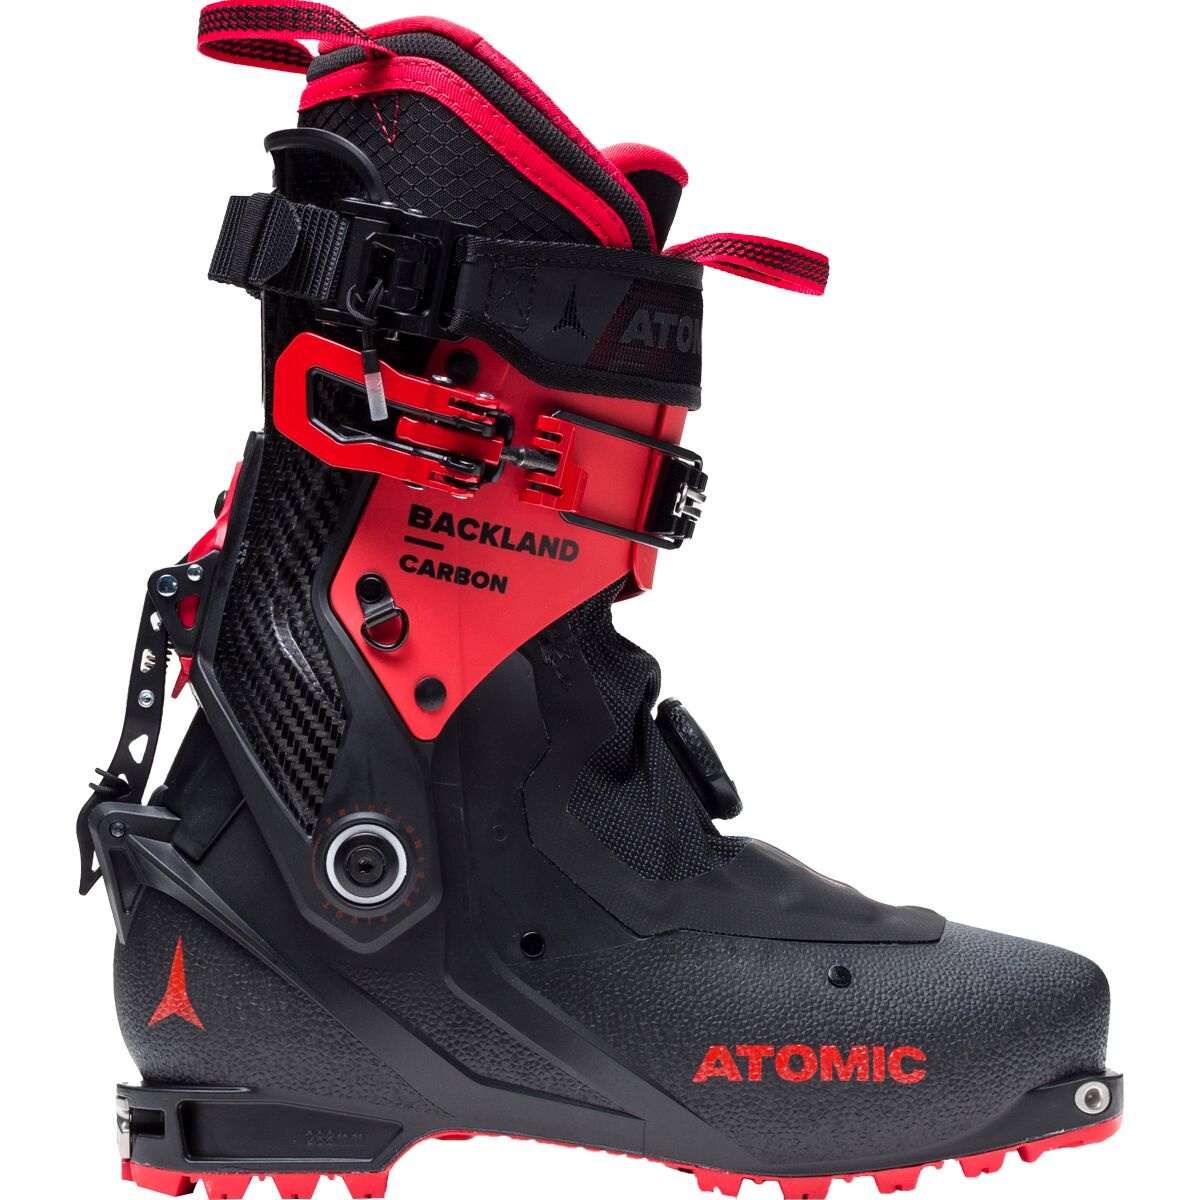 Atomic Backland Carbon Review | Tested & Rated